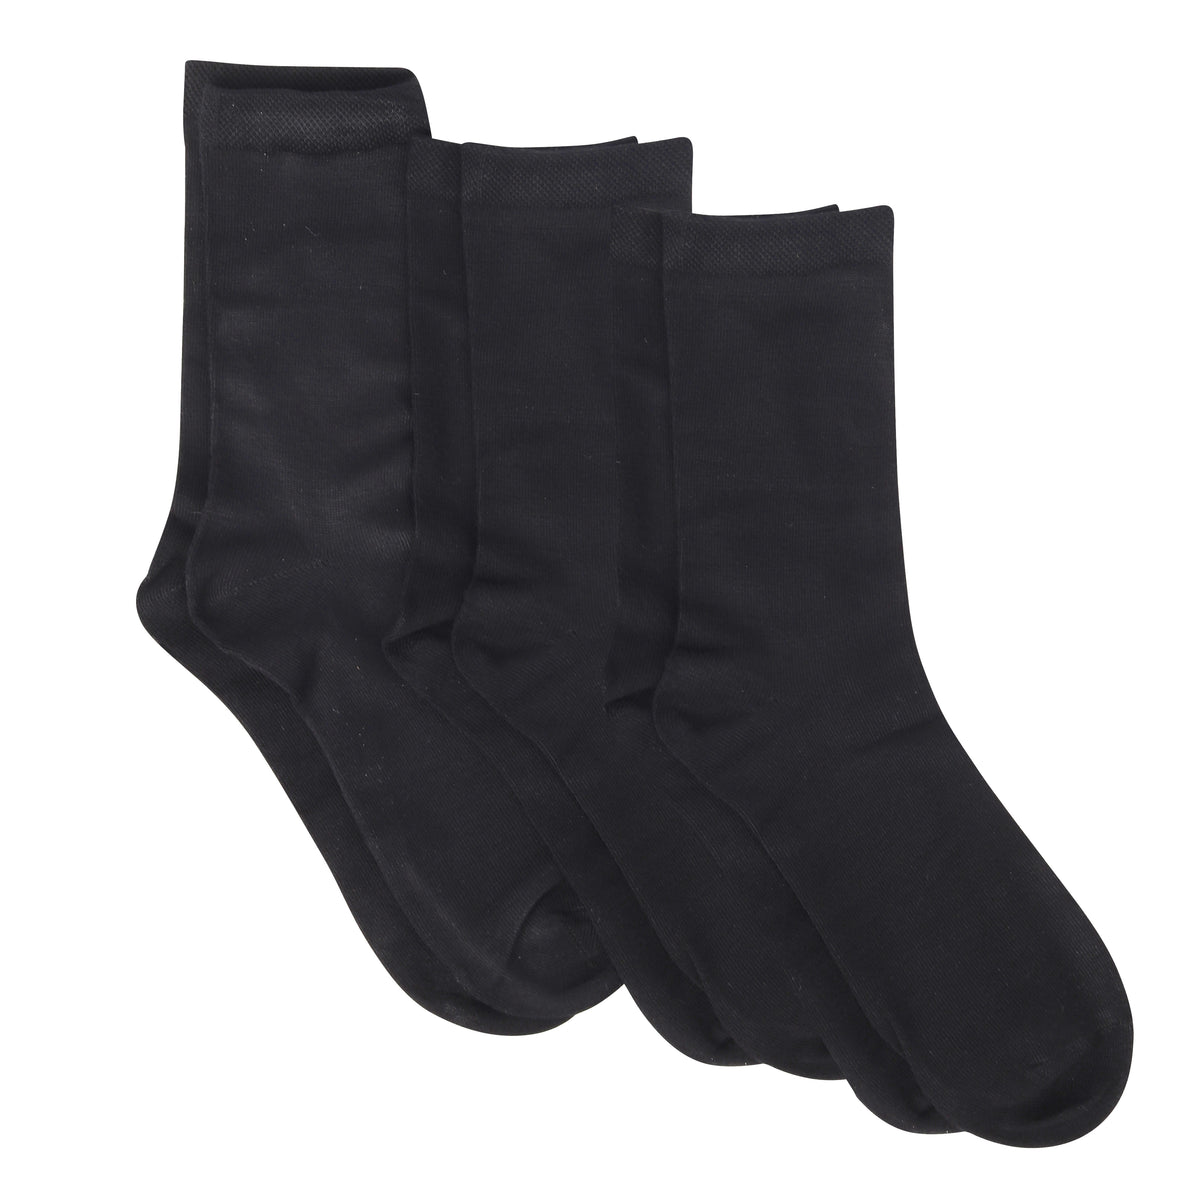 6 PAIRS BAMBOO SUPERSOFT LADIES LUXURY BLACK SOCKS – SOXS AND MORE